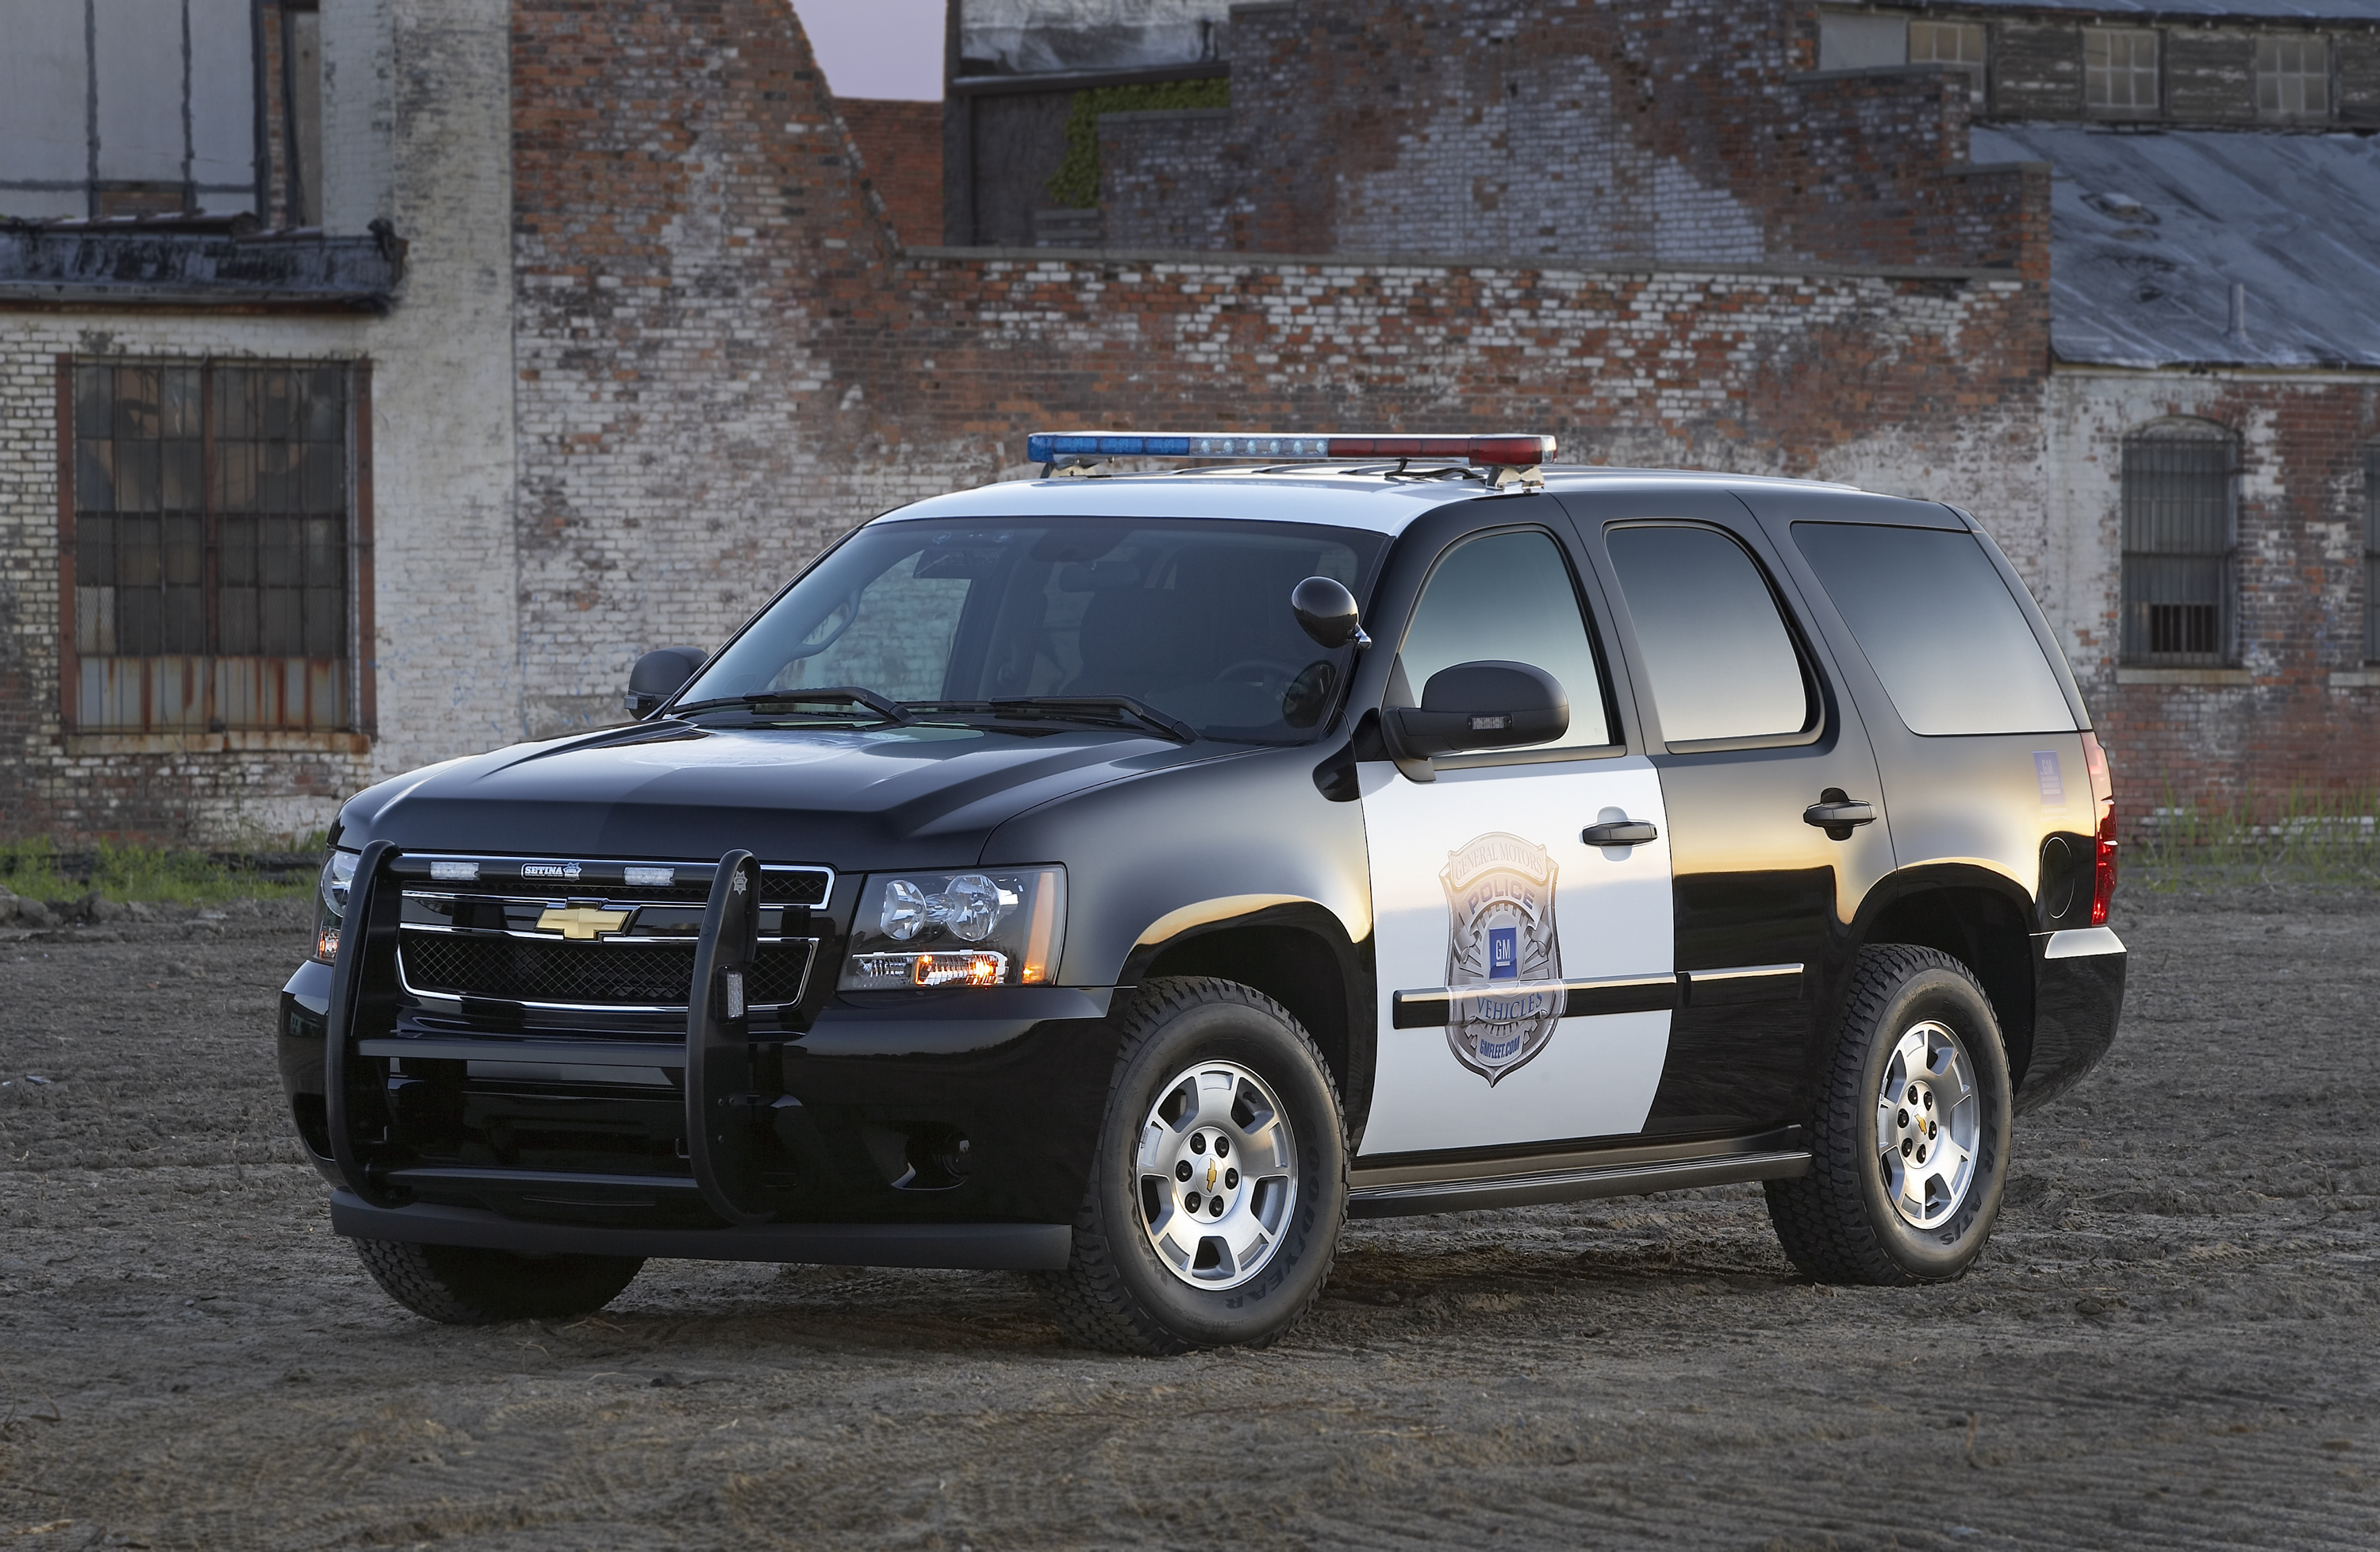 Tahoe Police Special Has Lowest Life Cycle Cost GM Authority.